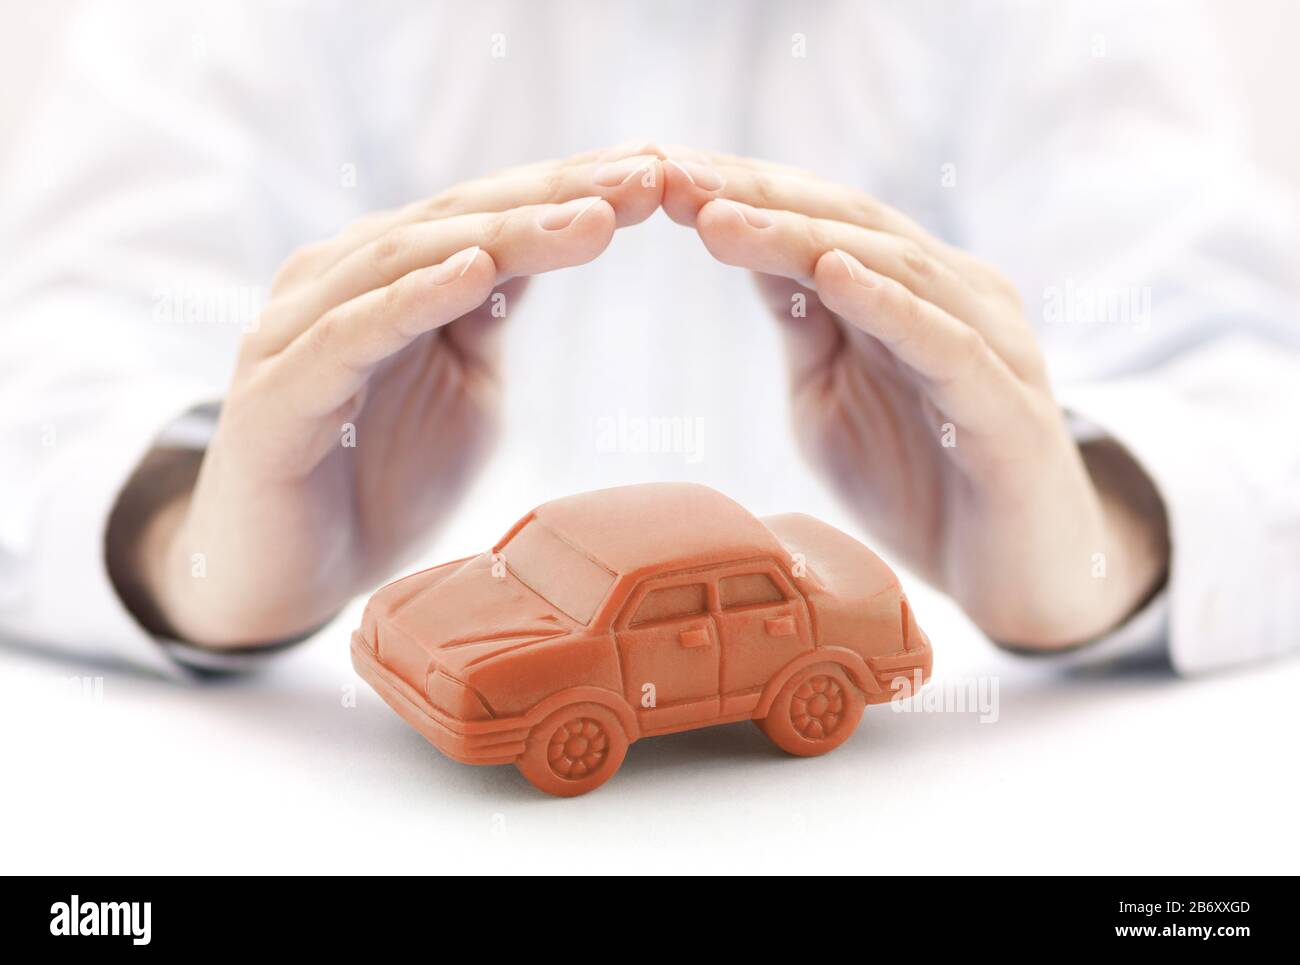 Car insurance concept with orange car toy covered by hands Stock Photo